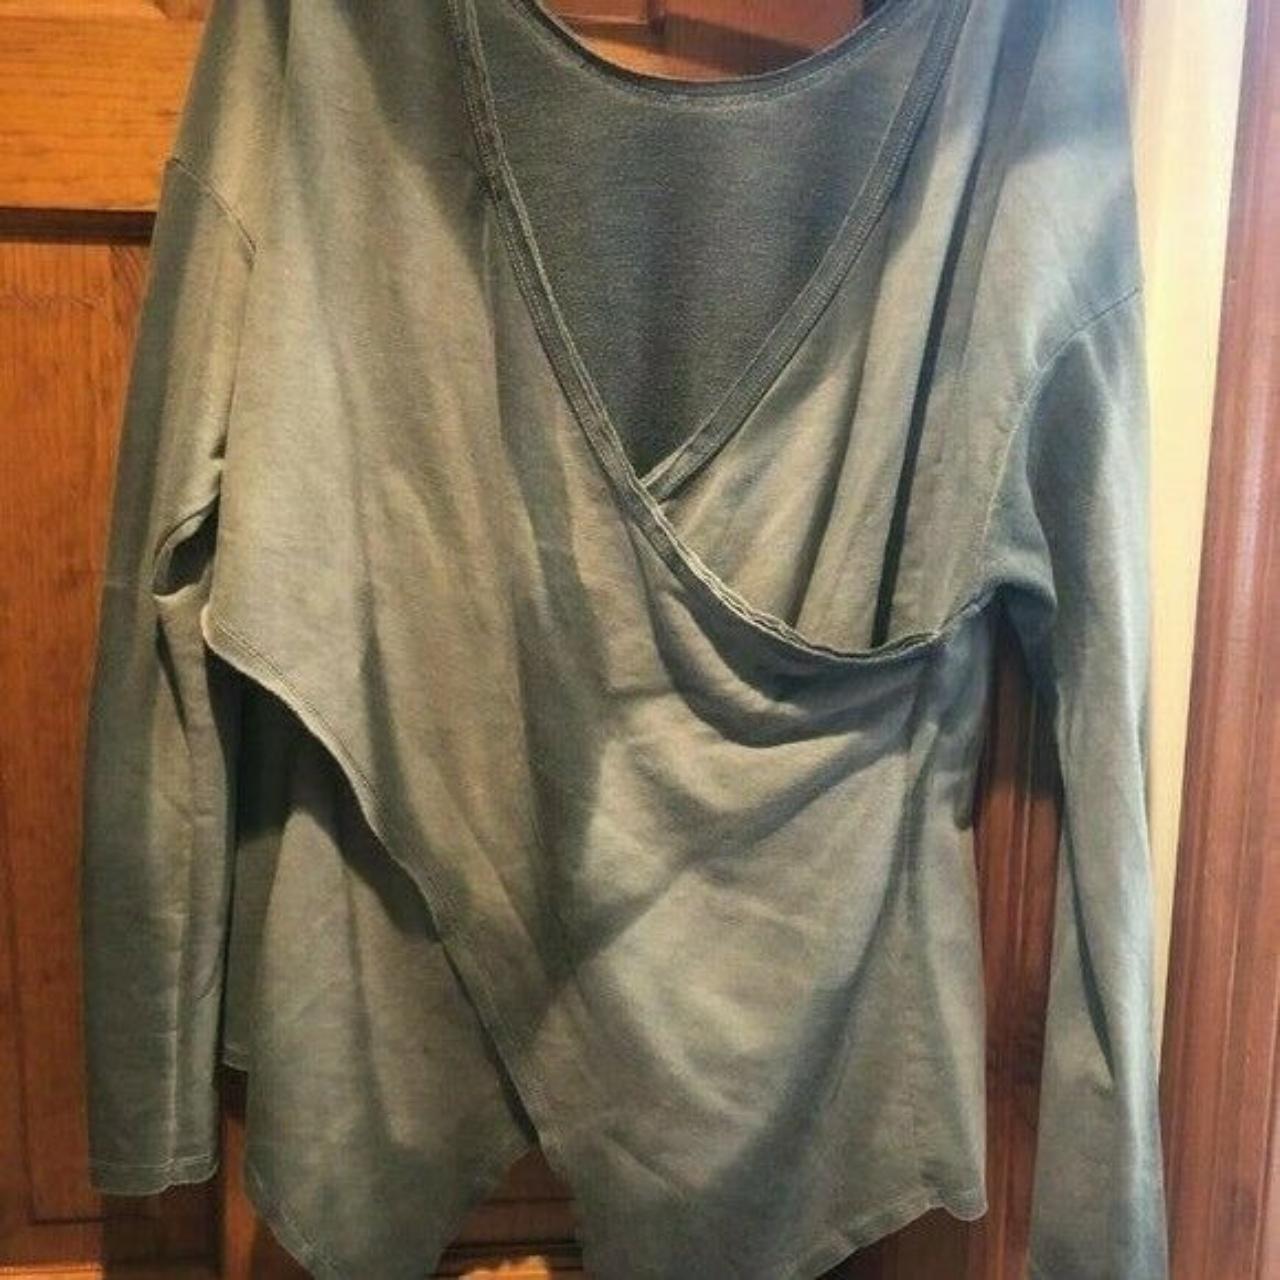 Product Image 2 - Flowy, faded gray Women's top